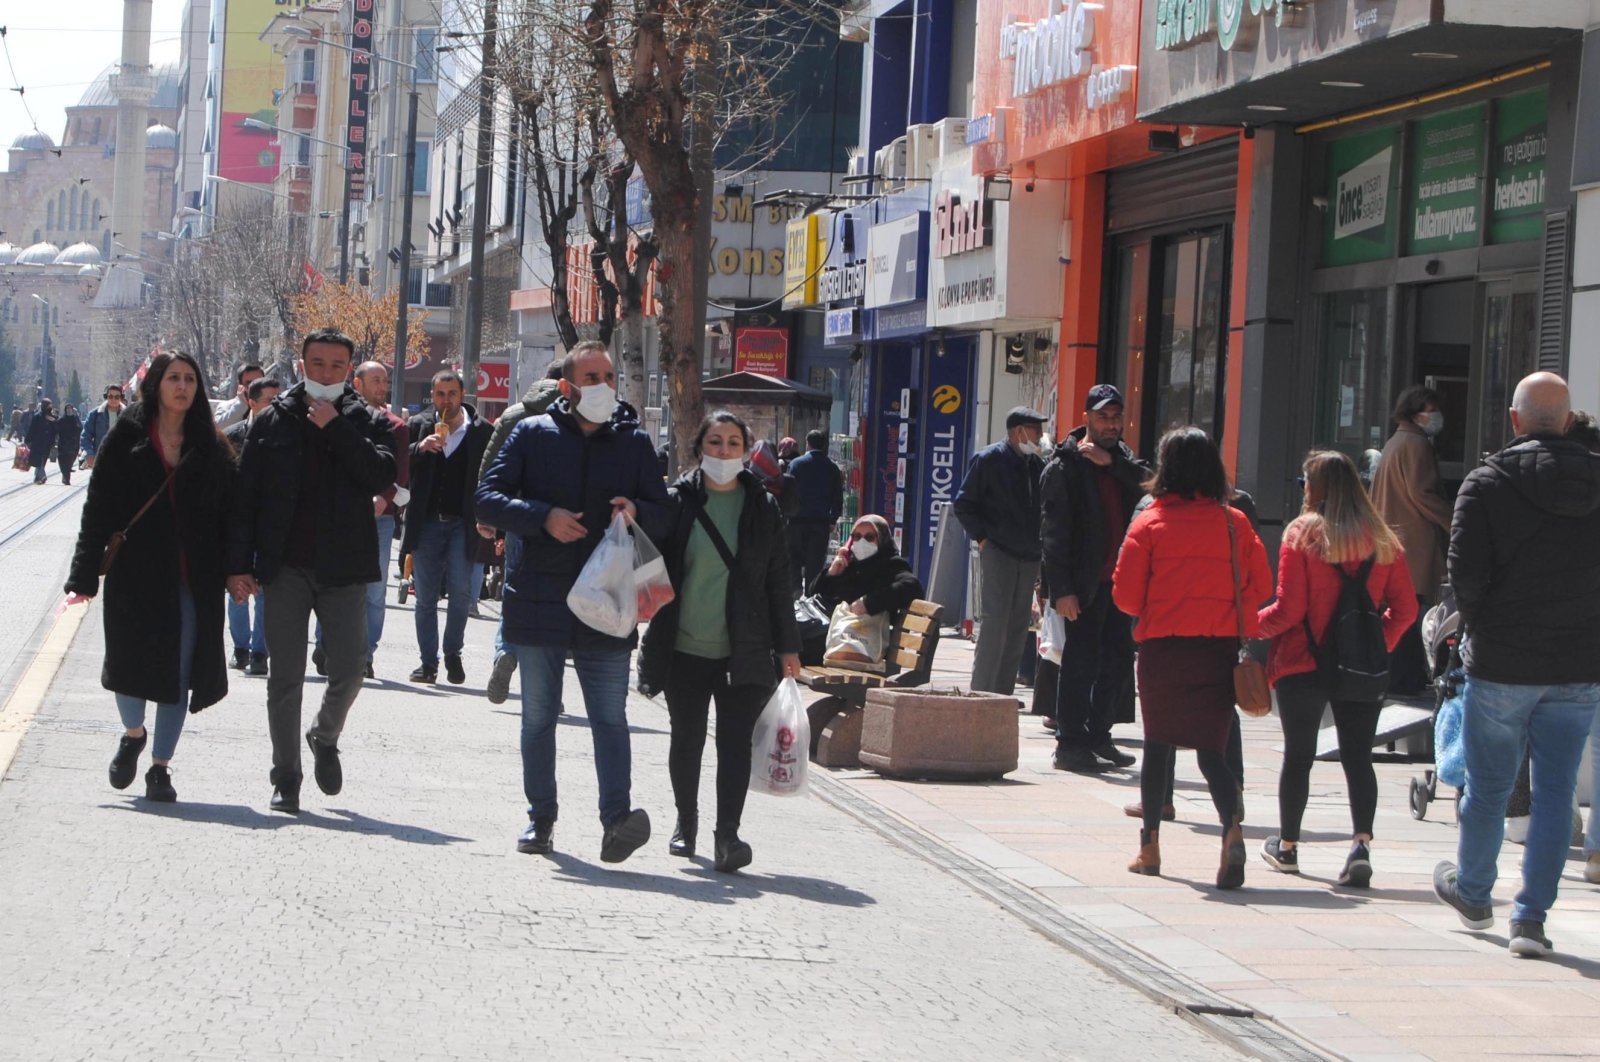 People wearing protective masks walk on a street in Eskişehir, central Turkey, March 28, 2022. (DHA PHOTO)